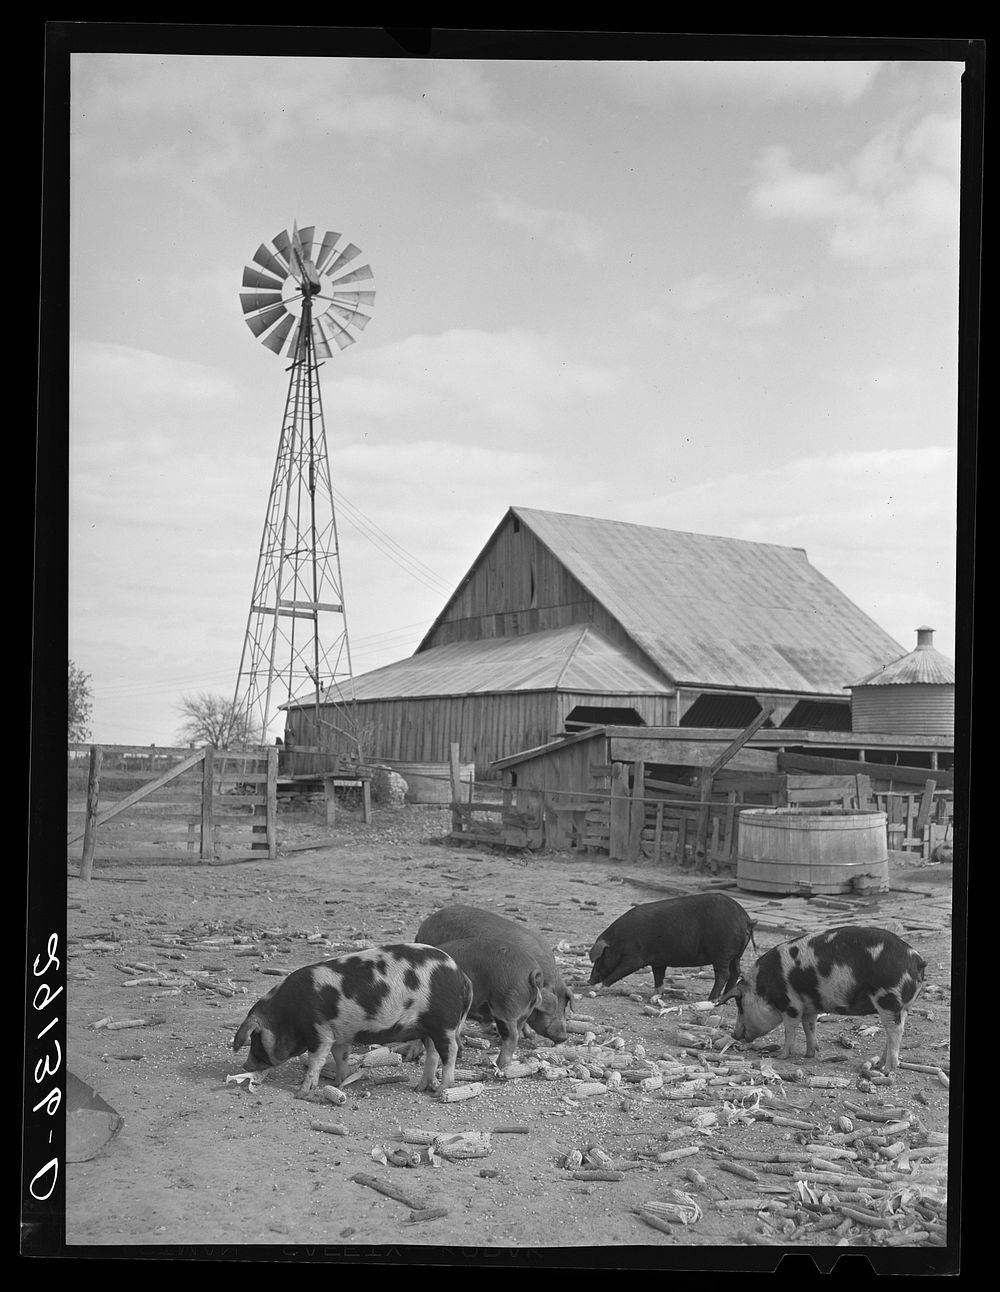 Hogs eating corn. Boone County, Missouri. Sourced from the Library of Congress.